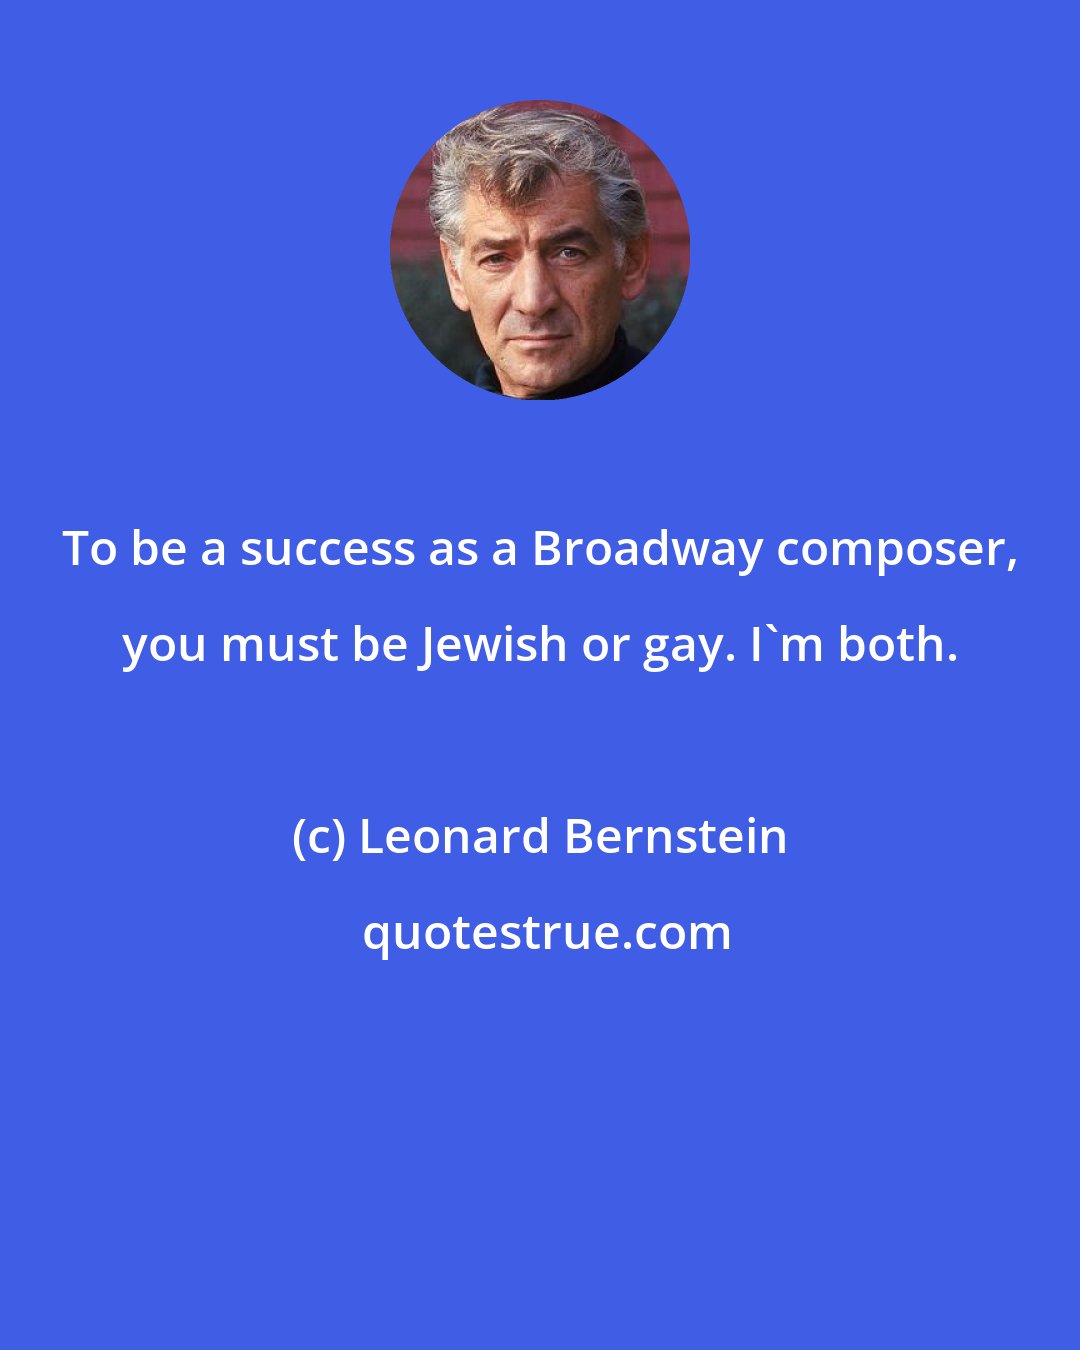 Leonard Bernstein: To be a success as a Broadway composer, you must be Jewish or gay. I'm both.